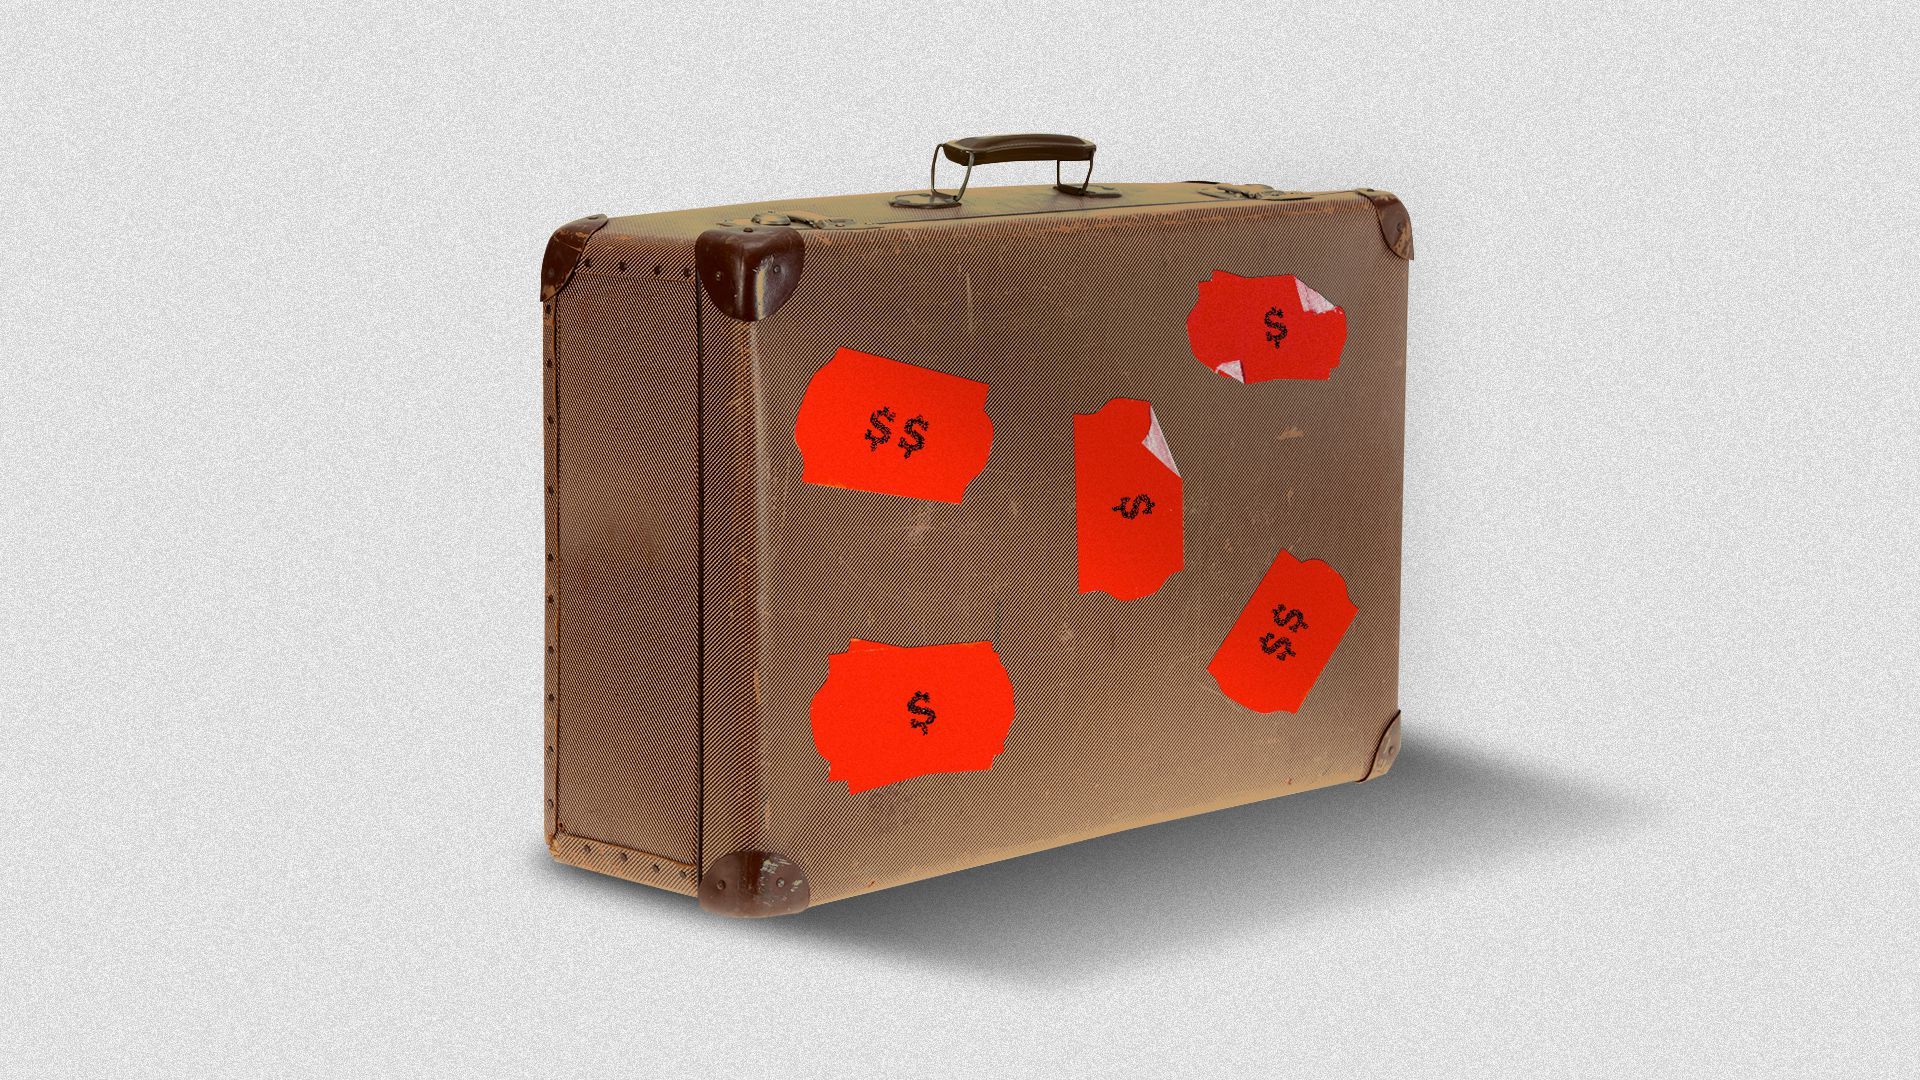 Illustration of a suitcase with price stickers on the side.